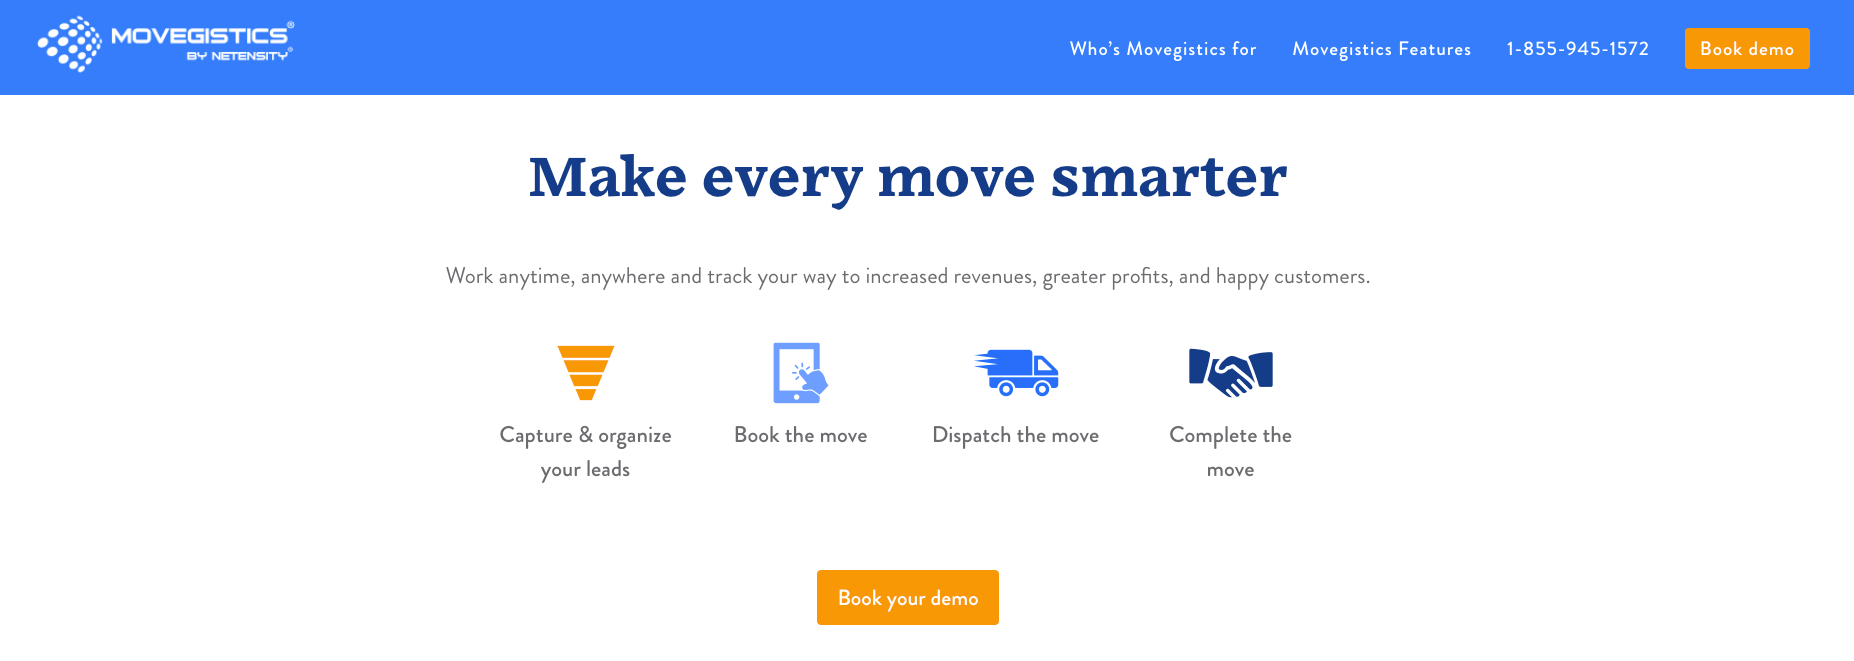 Best moving company software